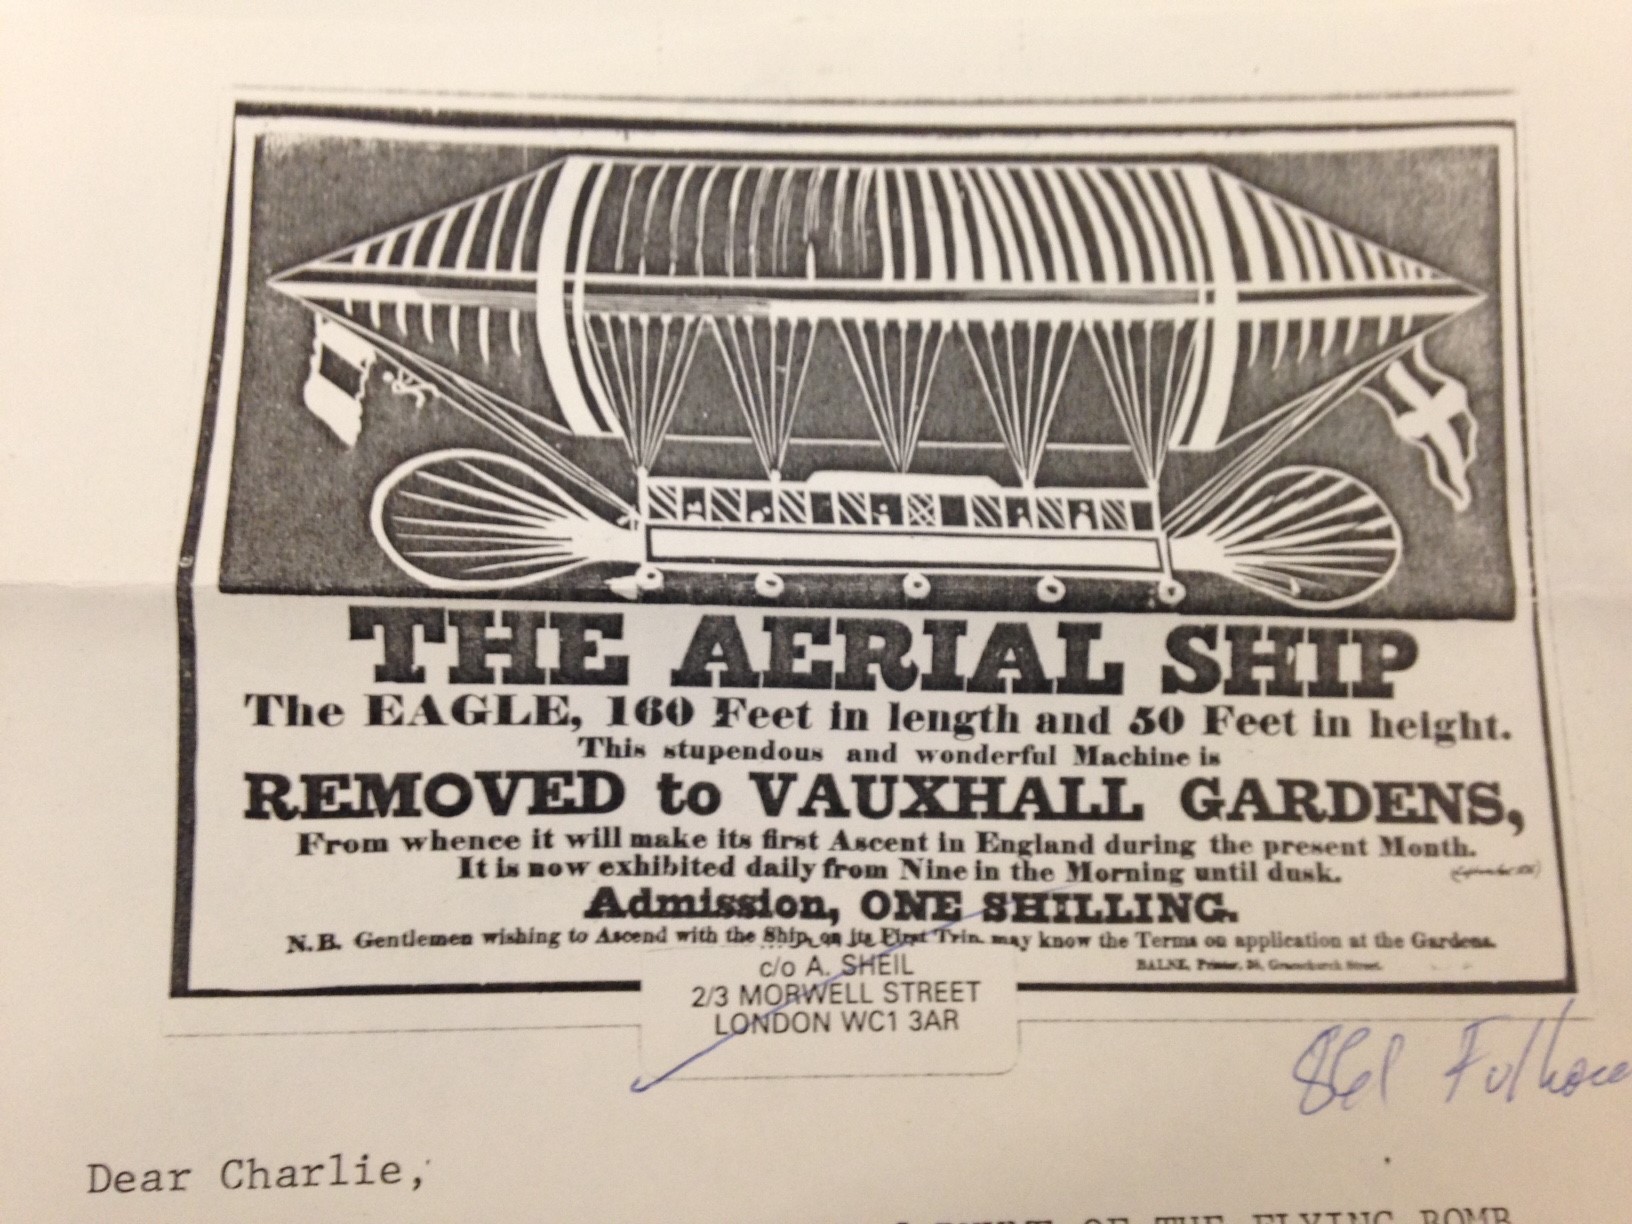 Advertisement for an aerial ship on stationary.